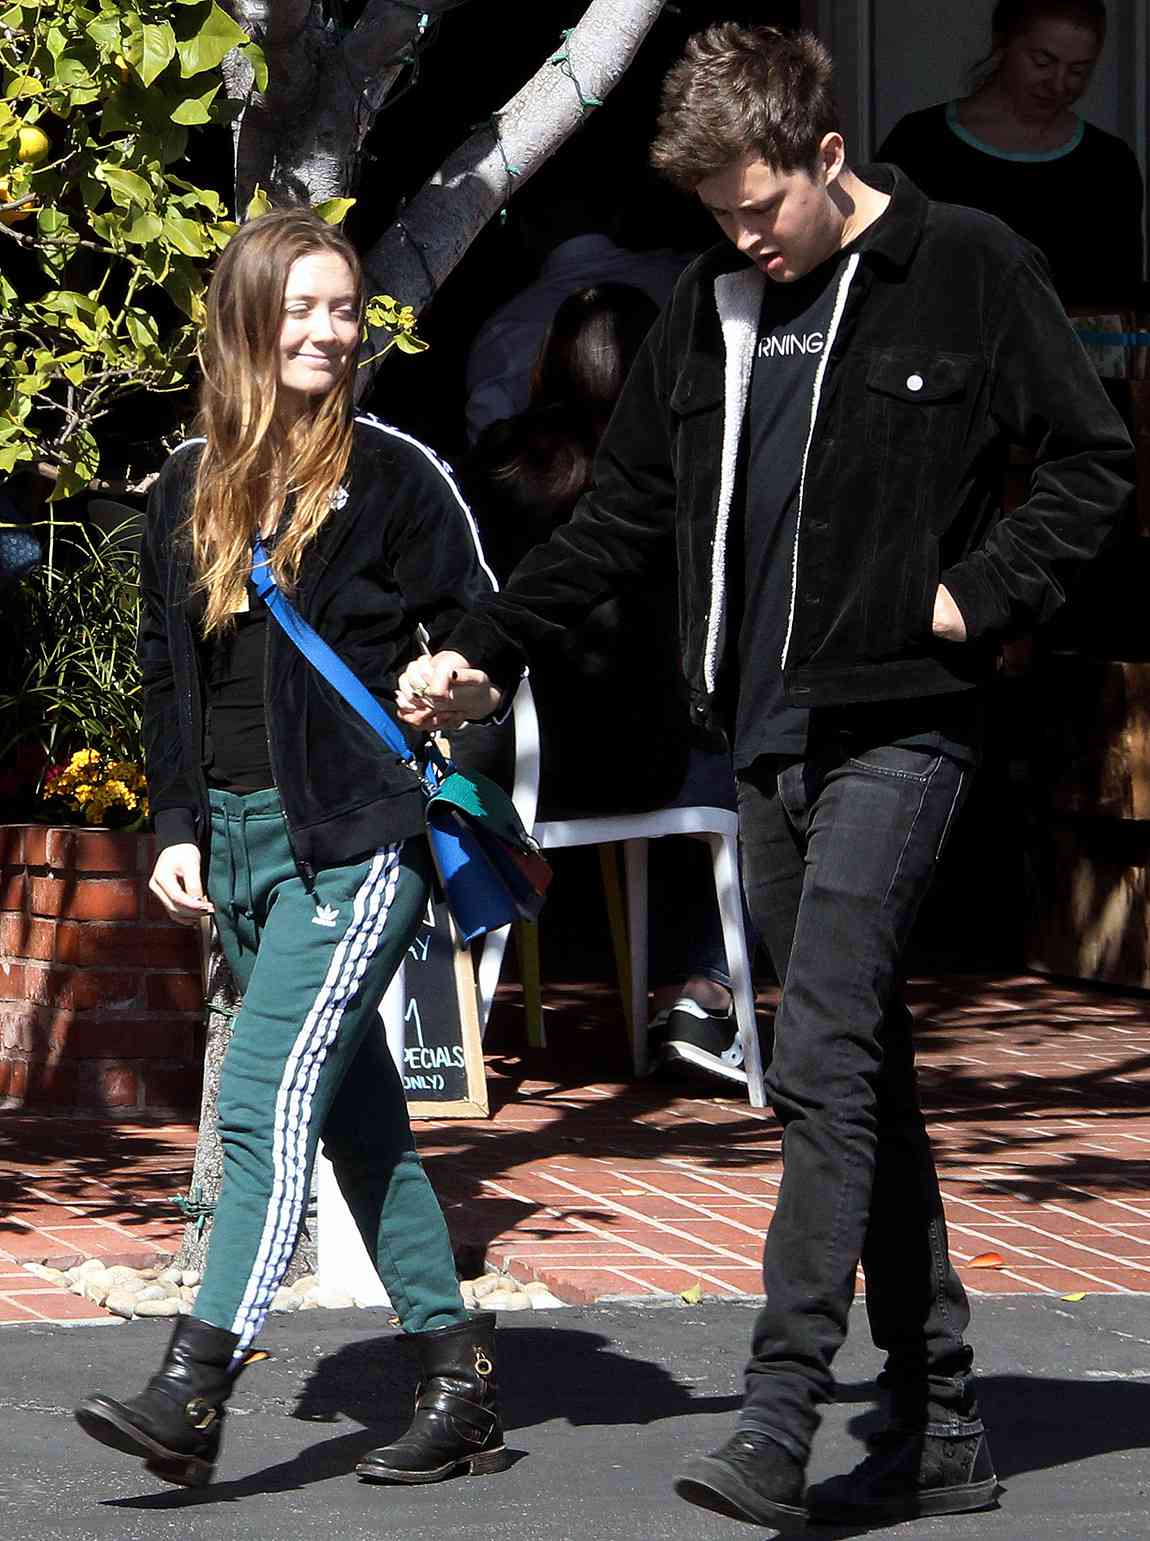 Billie Lourd looking very happy in Love as she leaves Mauro's cafe, holding hand with boyfriend Austen Rydell